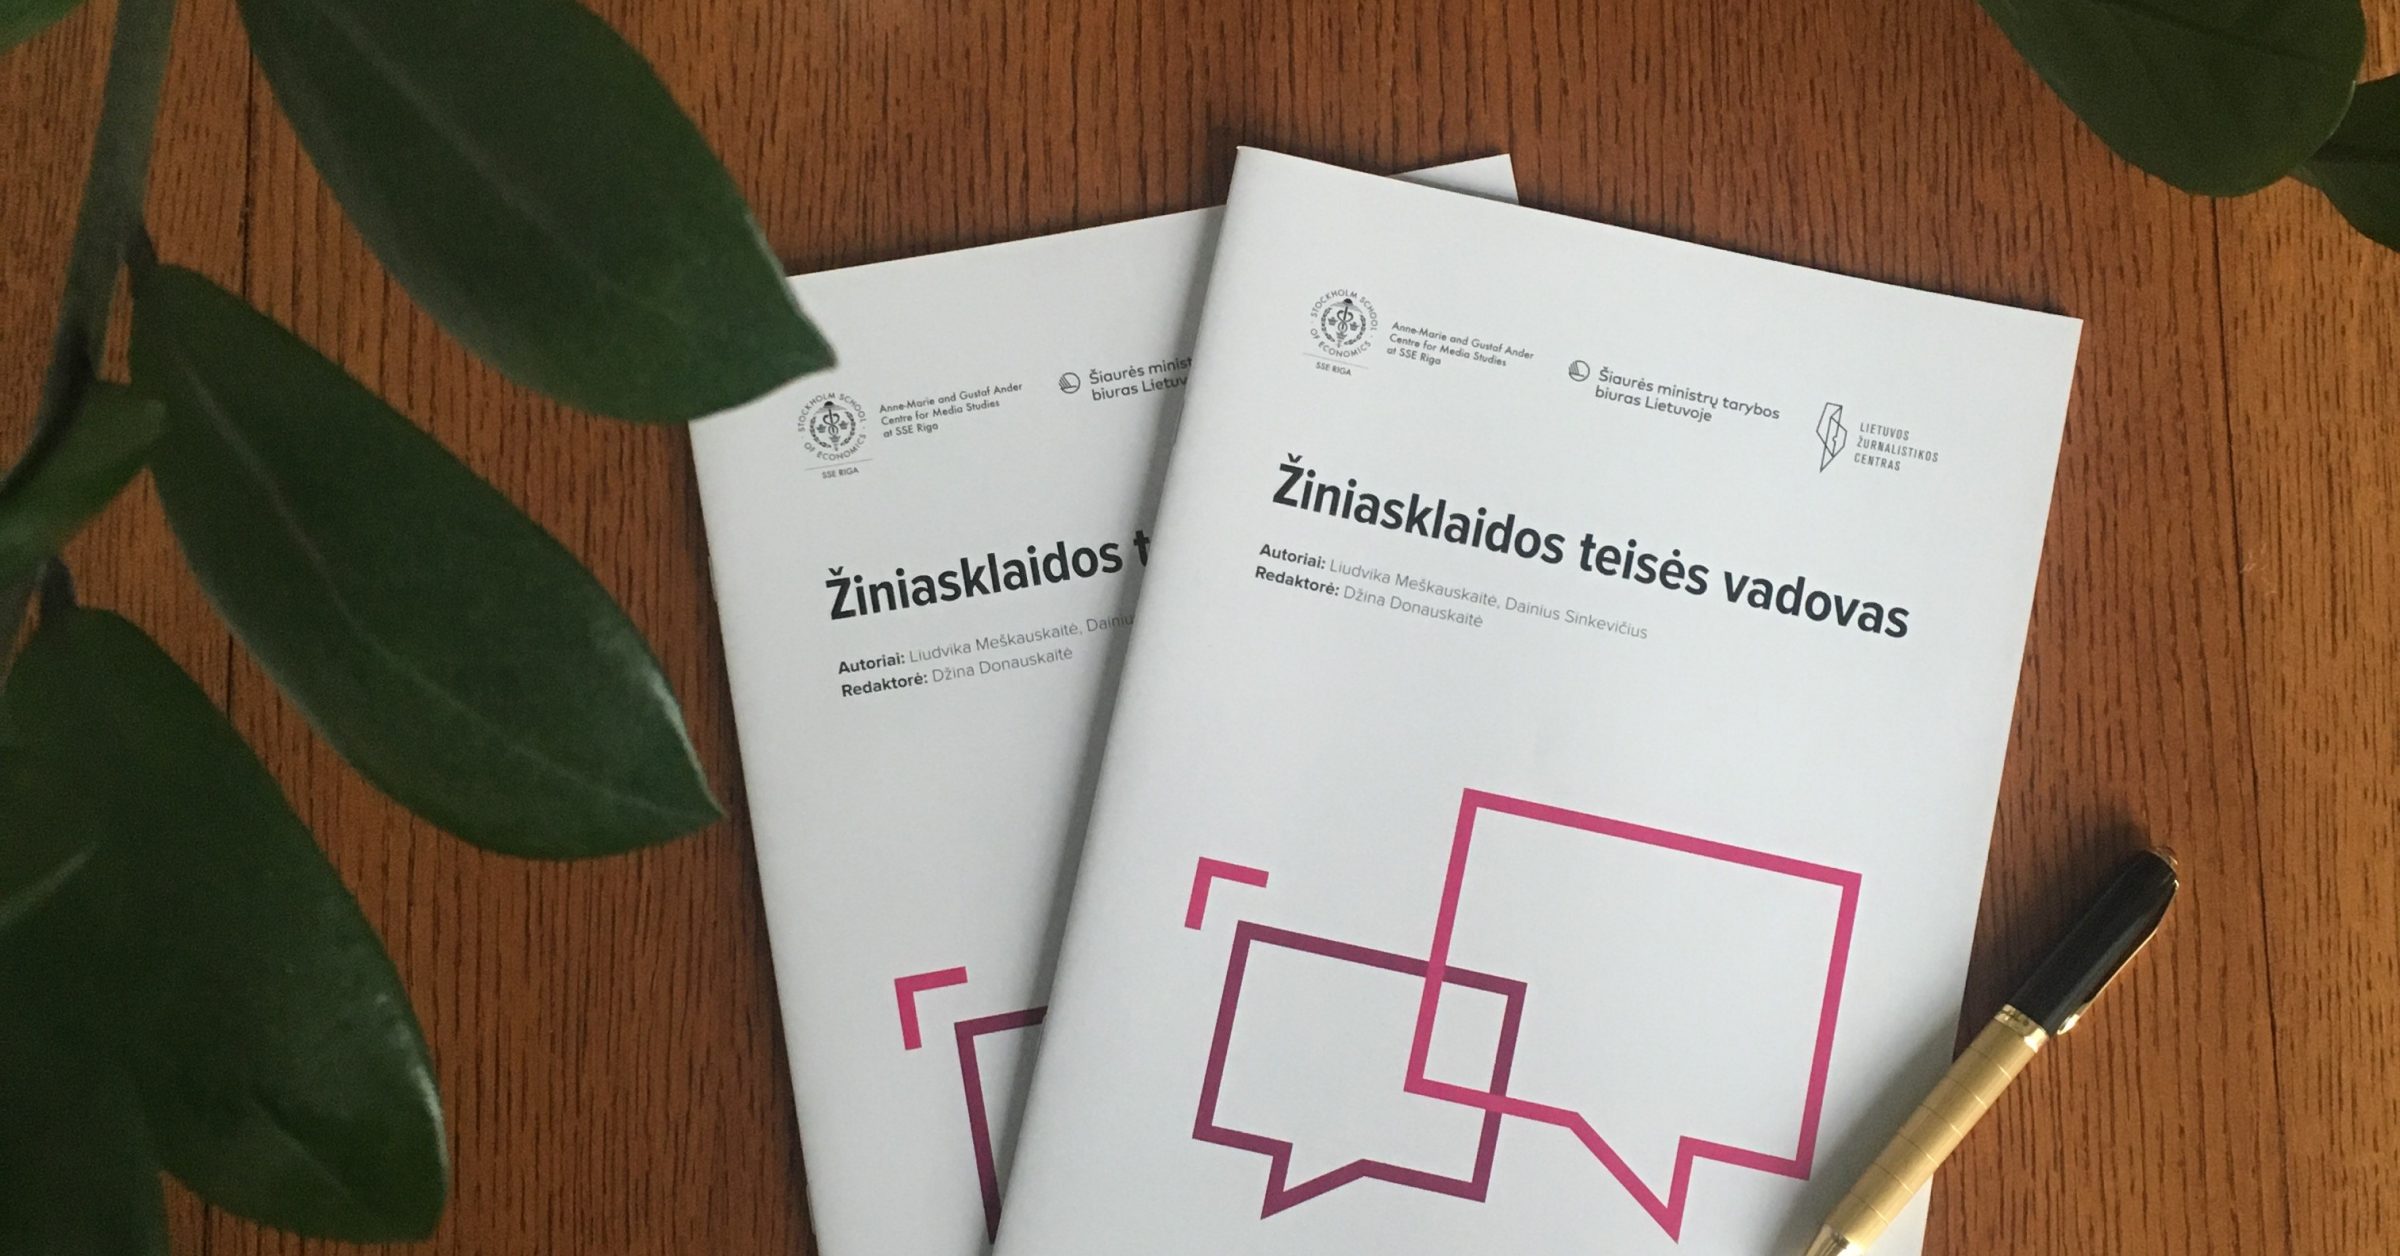 Media Law Guide for journalists in Lithuania